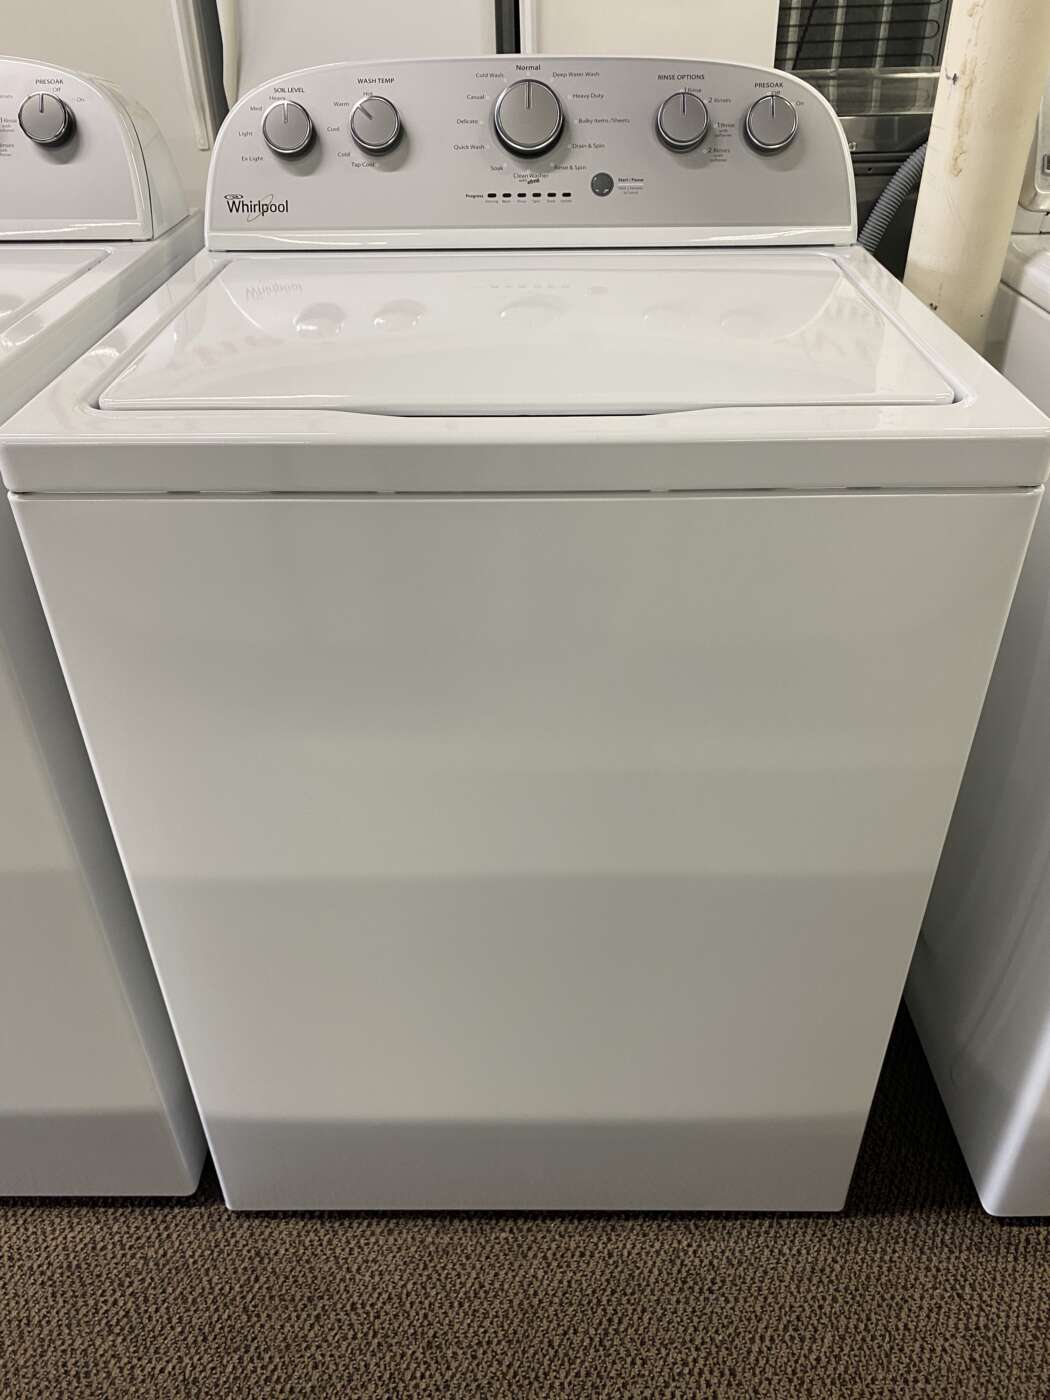 Reconditioned WHIRLPOOL 4.3 Cu. Ft. Top-Load H/E Washer – White